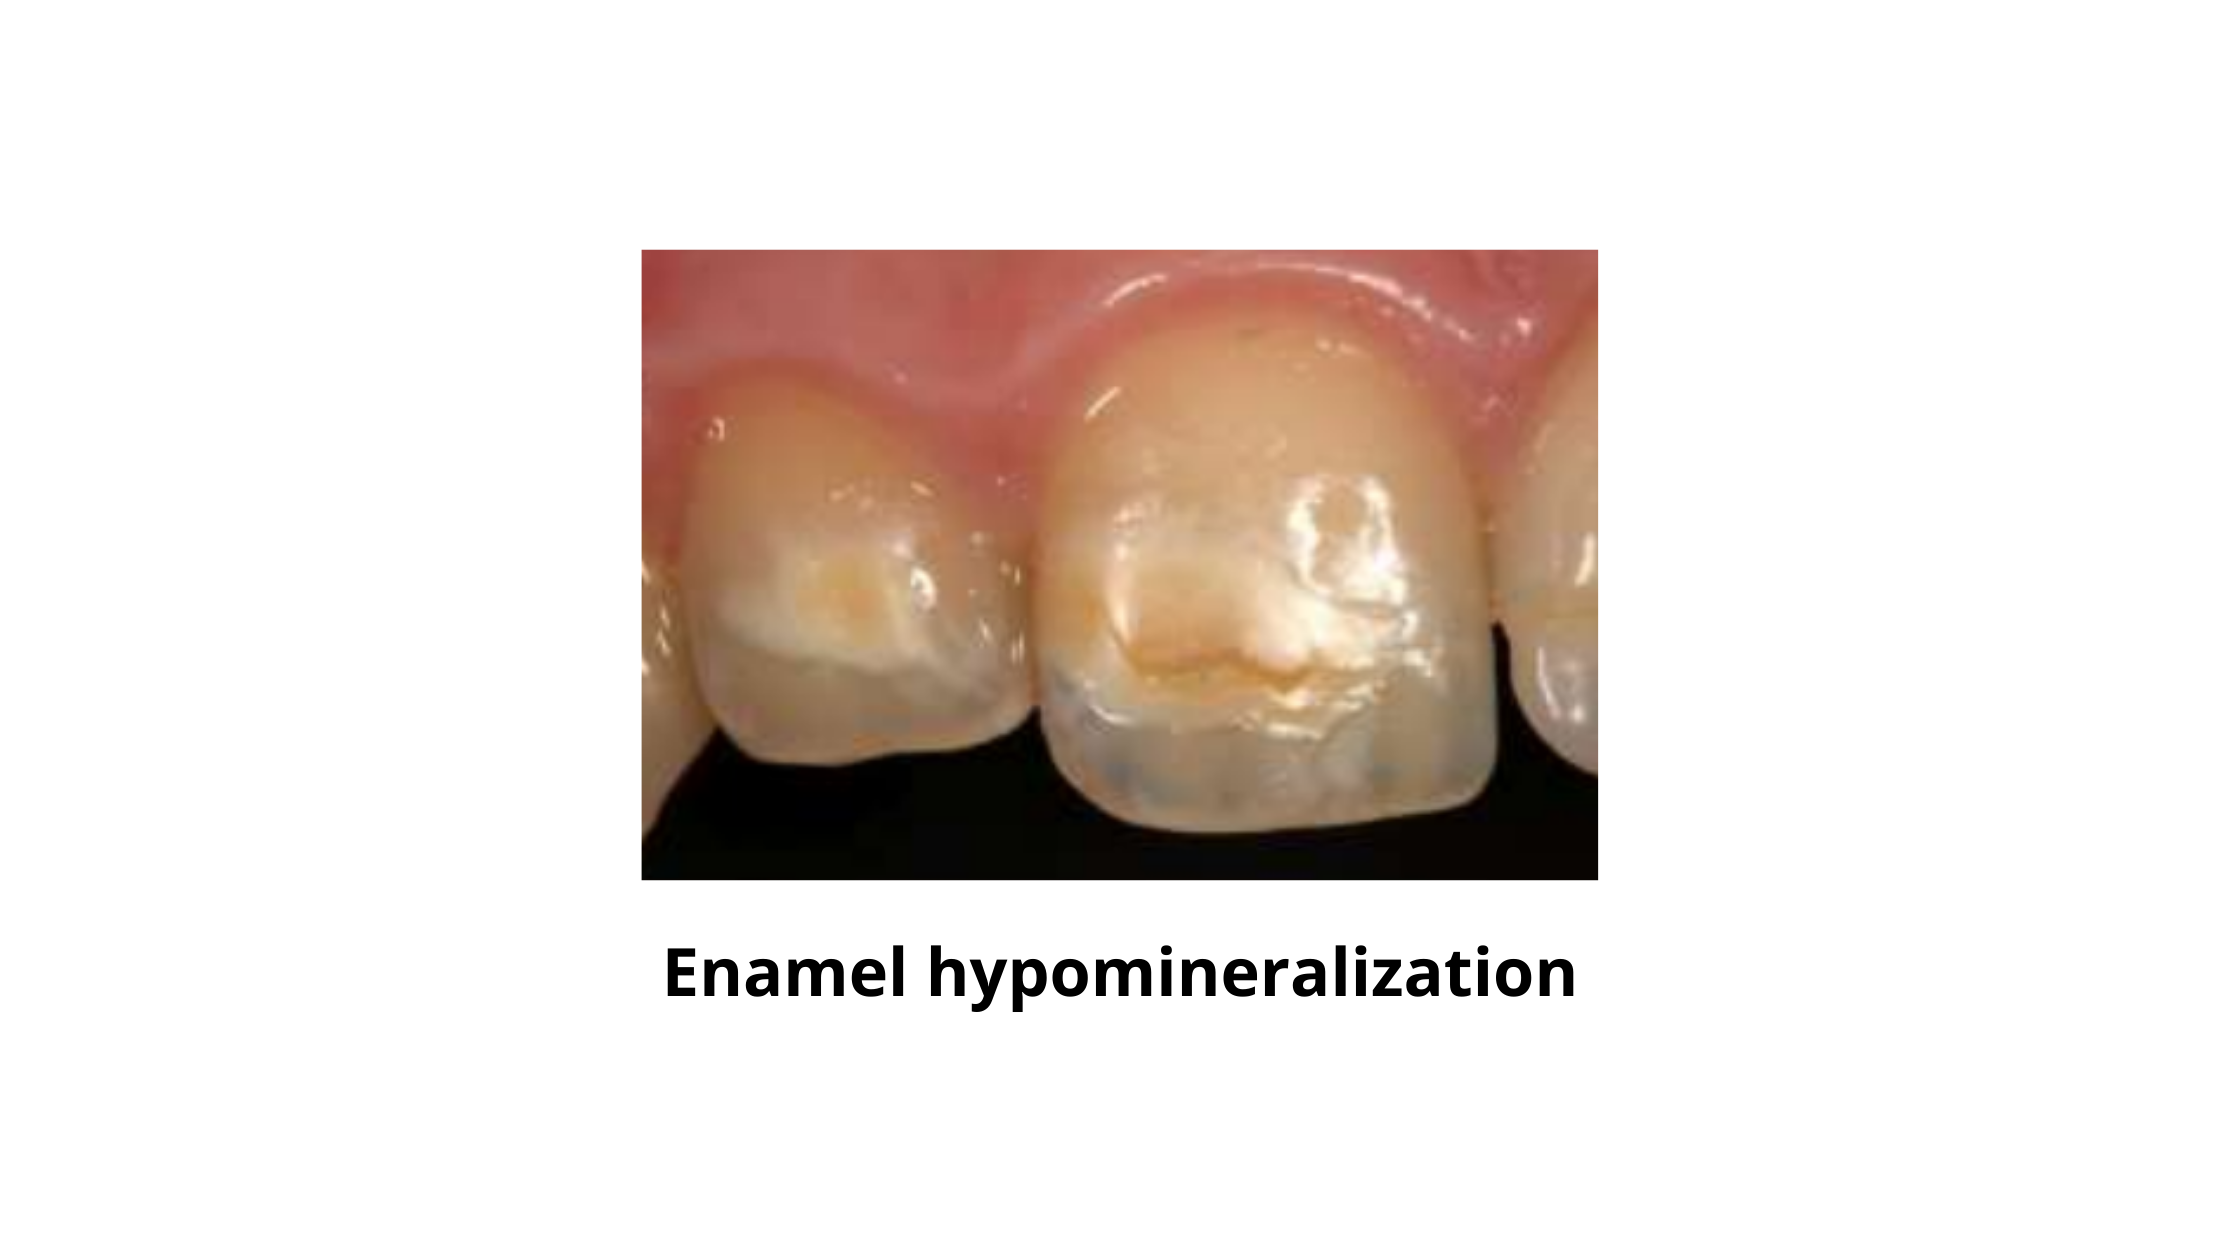 enamel hypomineralization on the incisors